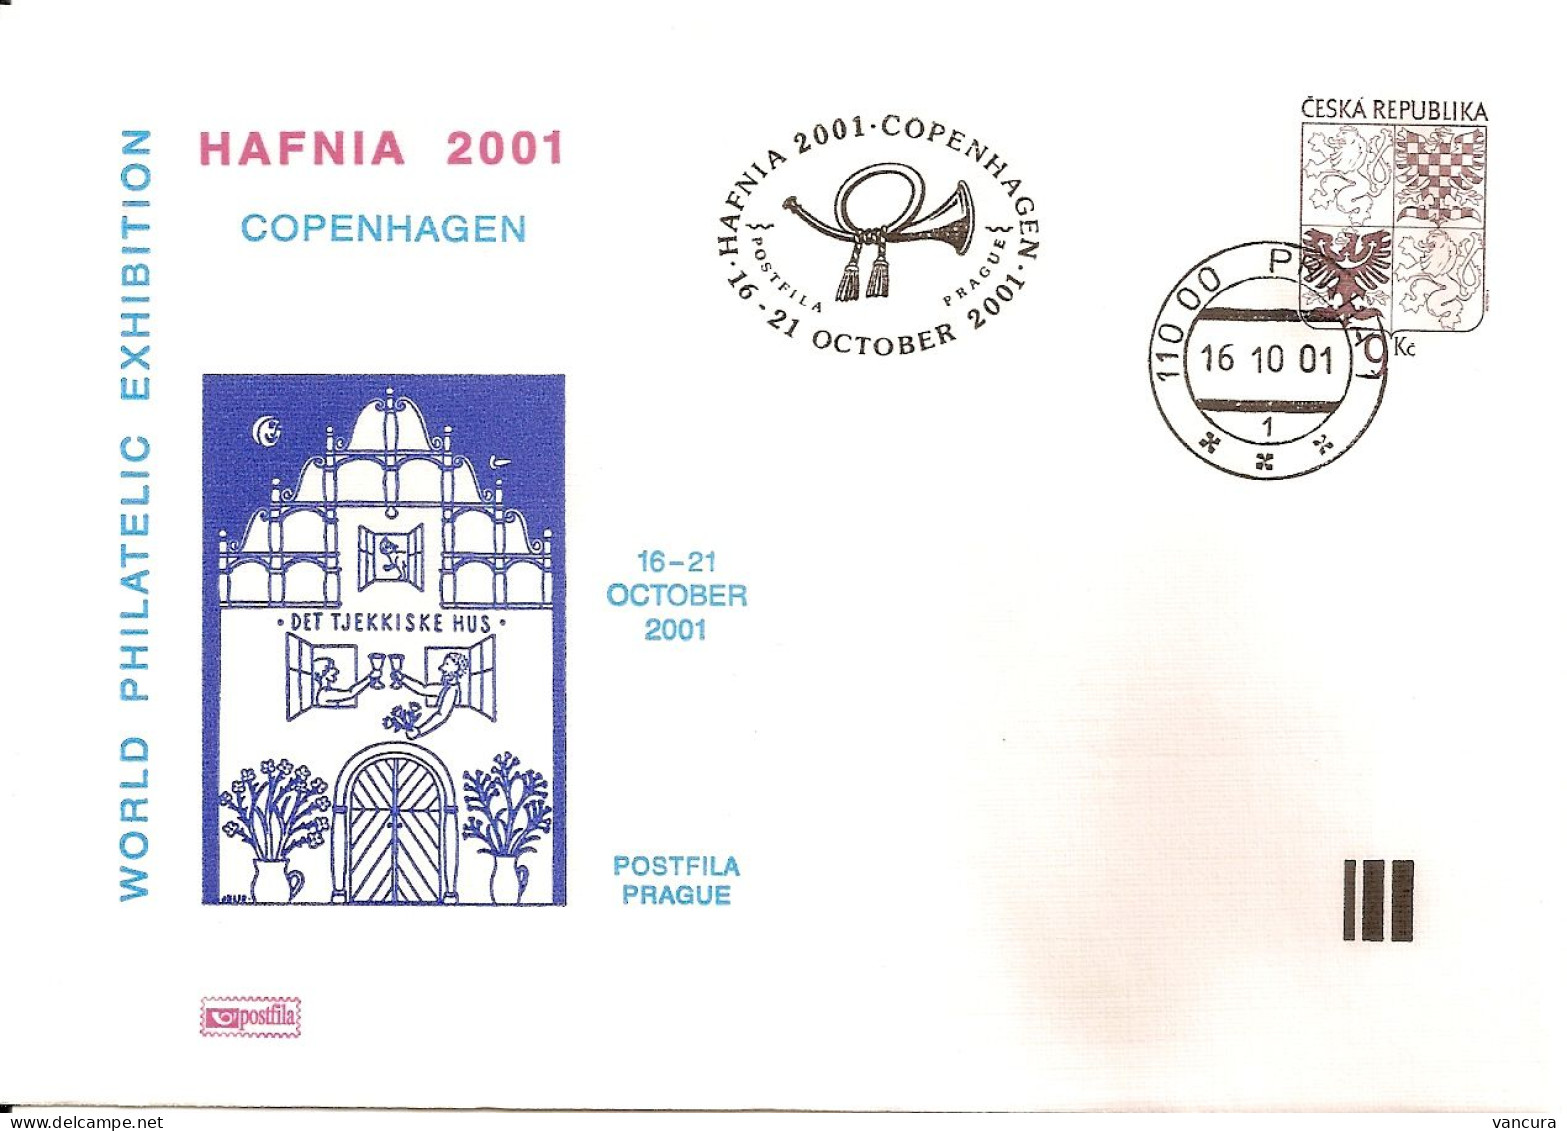 COB A 75 Czech Republic Hafnia Stamp Exhibition 2001 NOTICE POOR SCAN, BUT THE COVER IS FINE! - Enveloppes